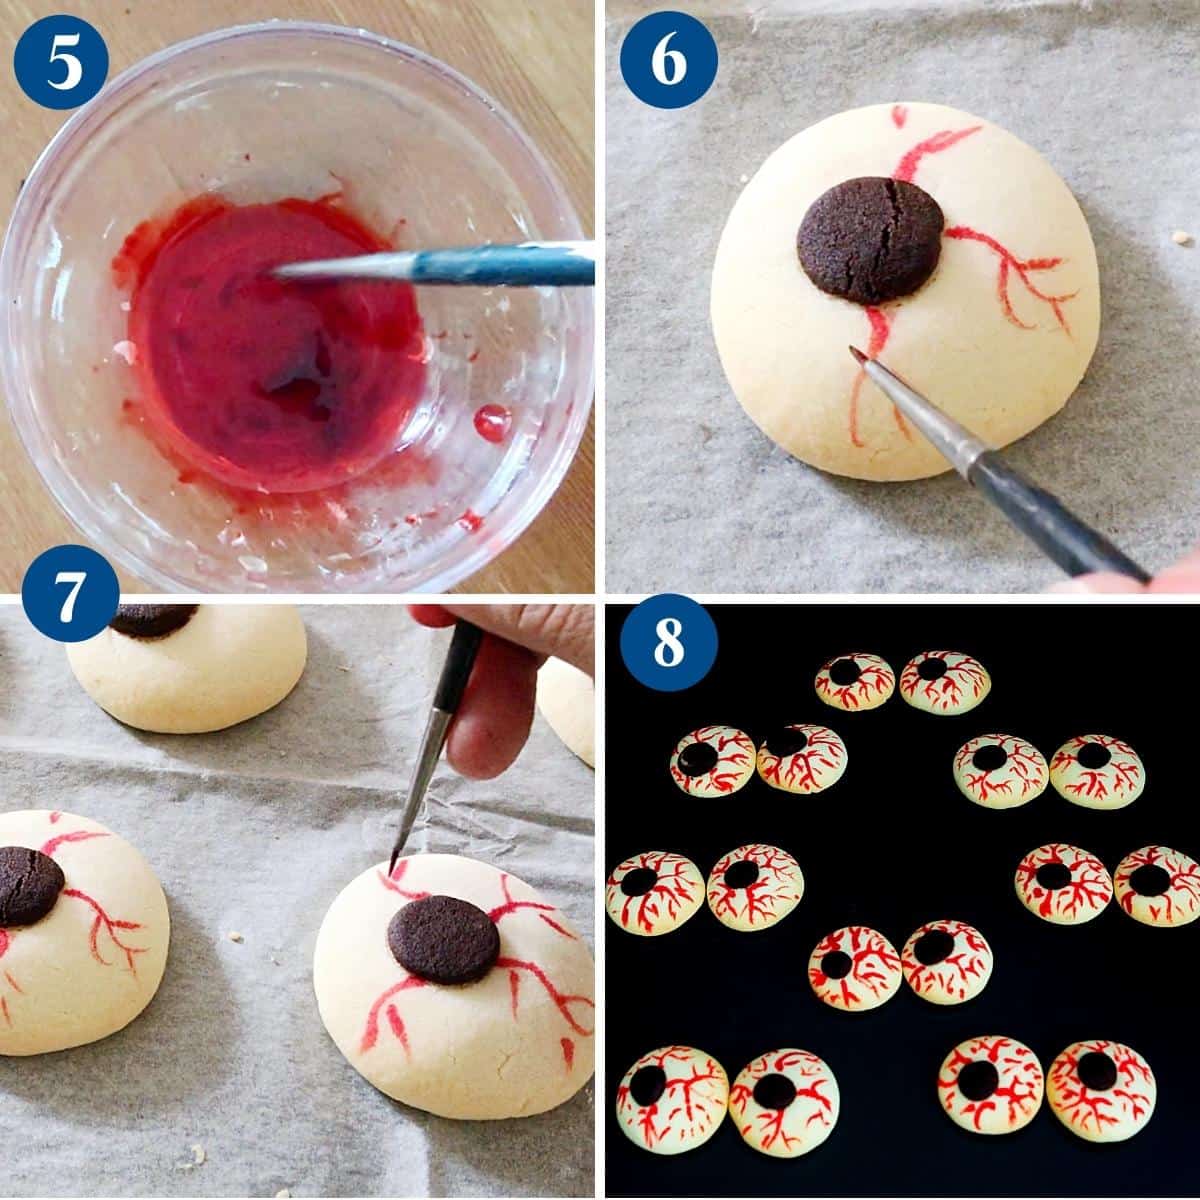 progress pictures painting the eyeball cookies. 